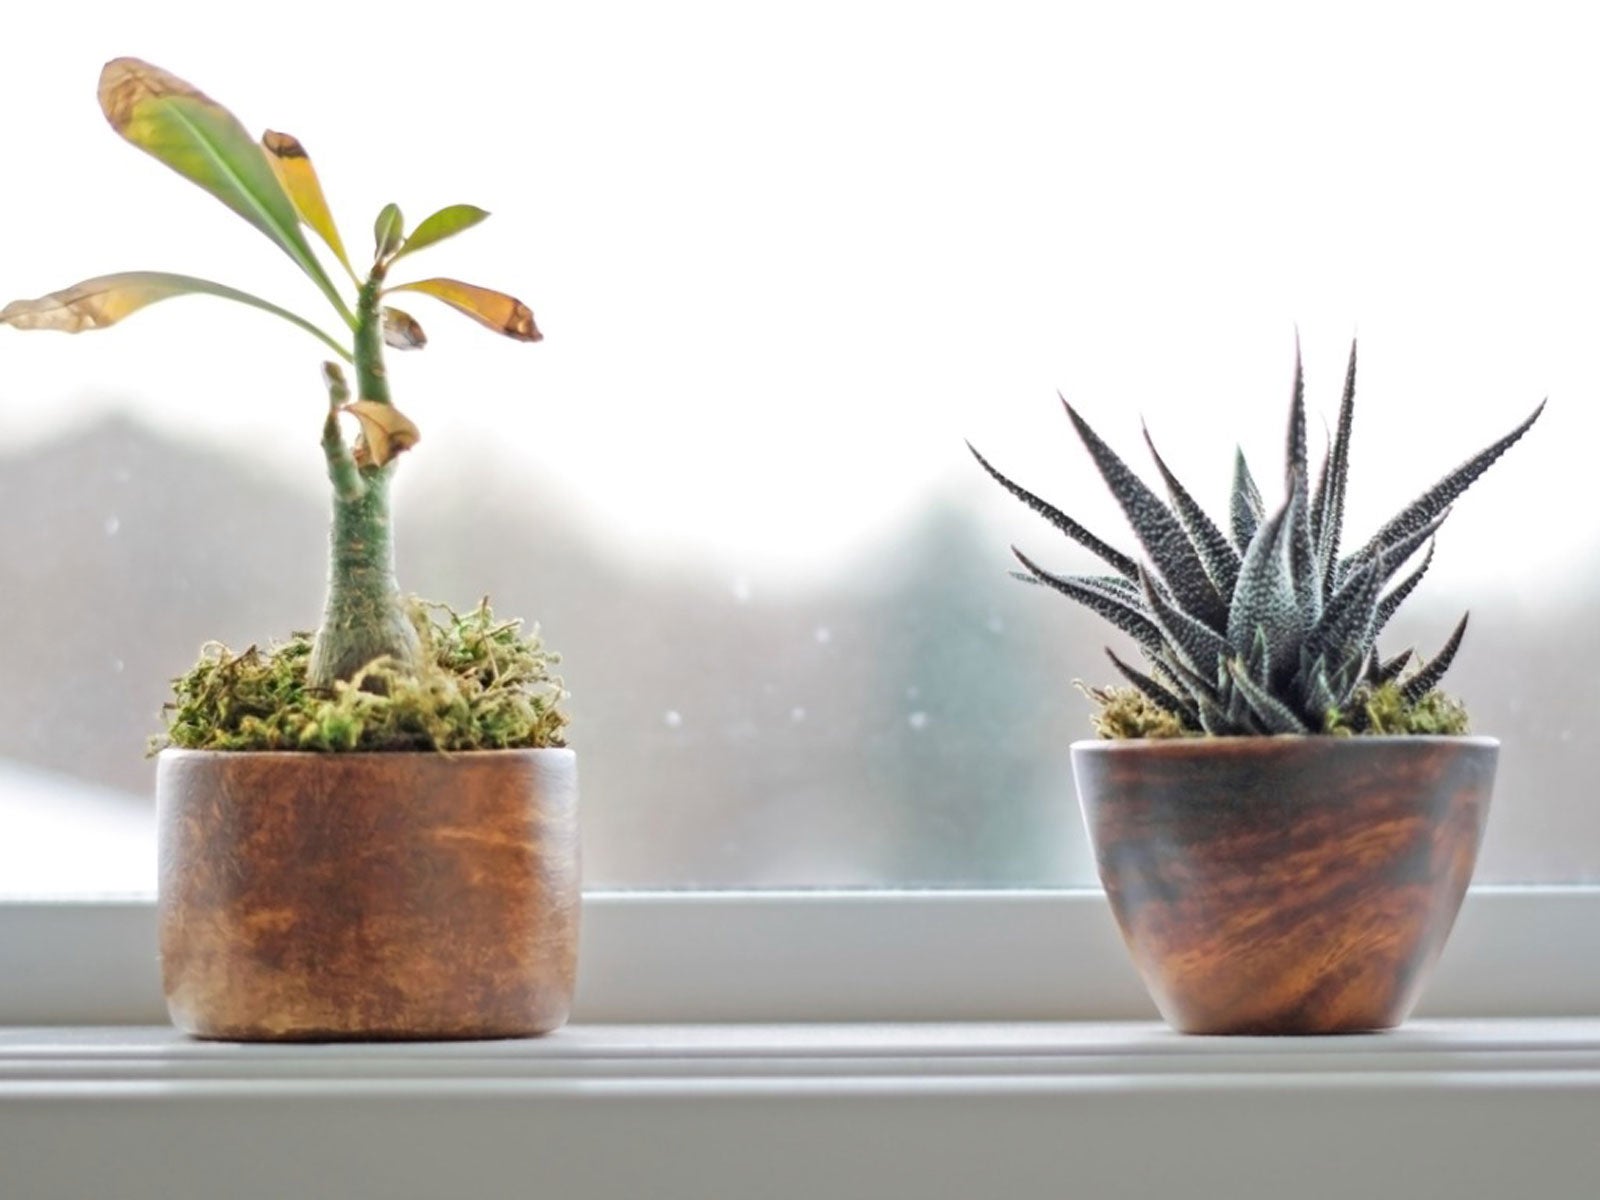 How to Keep Houseplants Warm in Winter